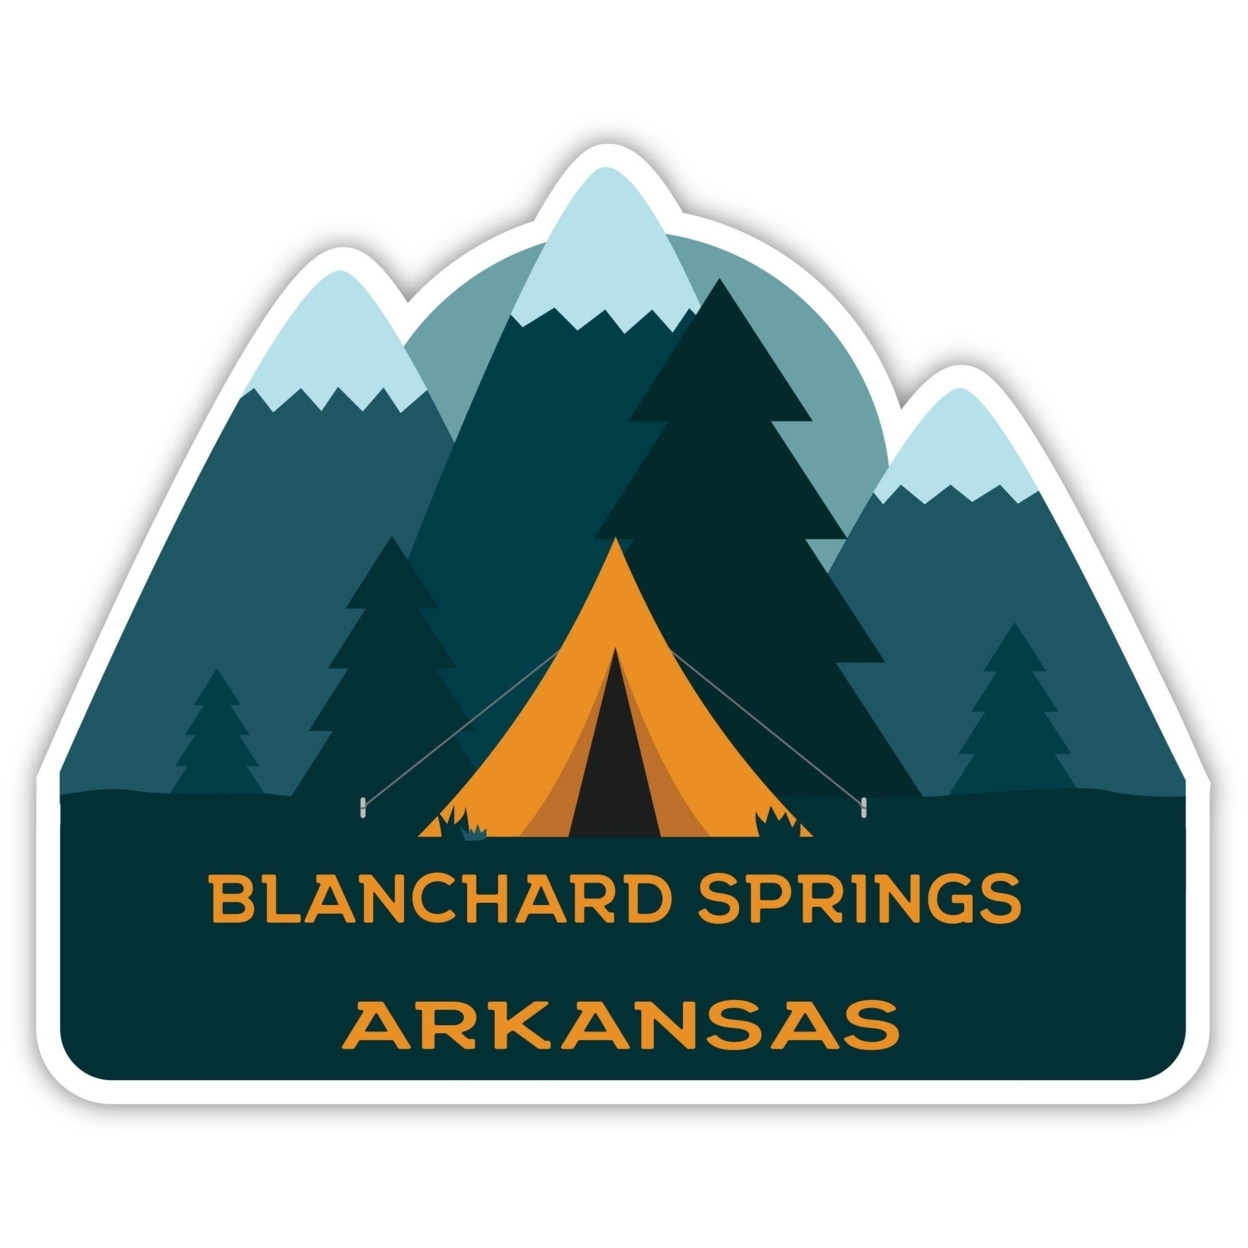 Blanchard Springs Arkansas Souvenir Decorative Stickers (Choose Theme And Size) - 4-Pack, 12-Inch, Camp Life